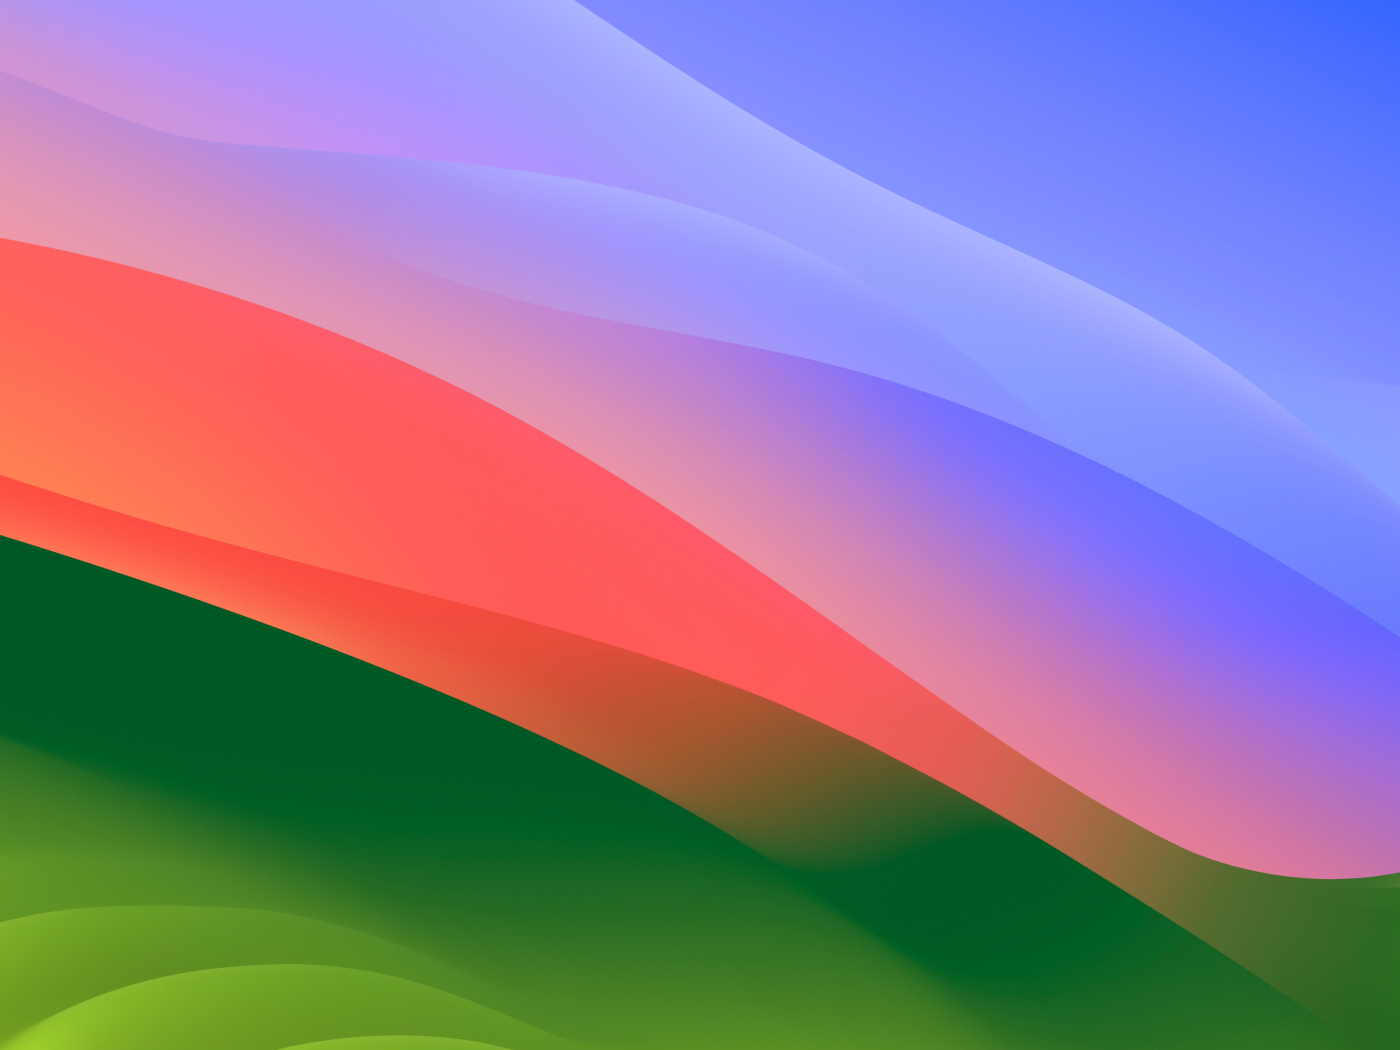 MacOS Sonoma, colorful waves, stock photo, 1400x1050 wallpaper